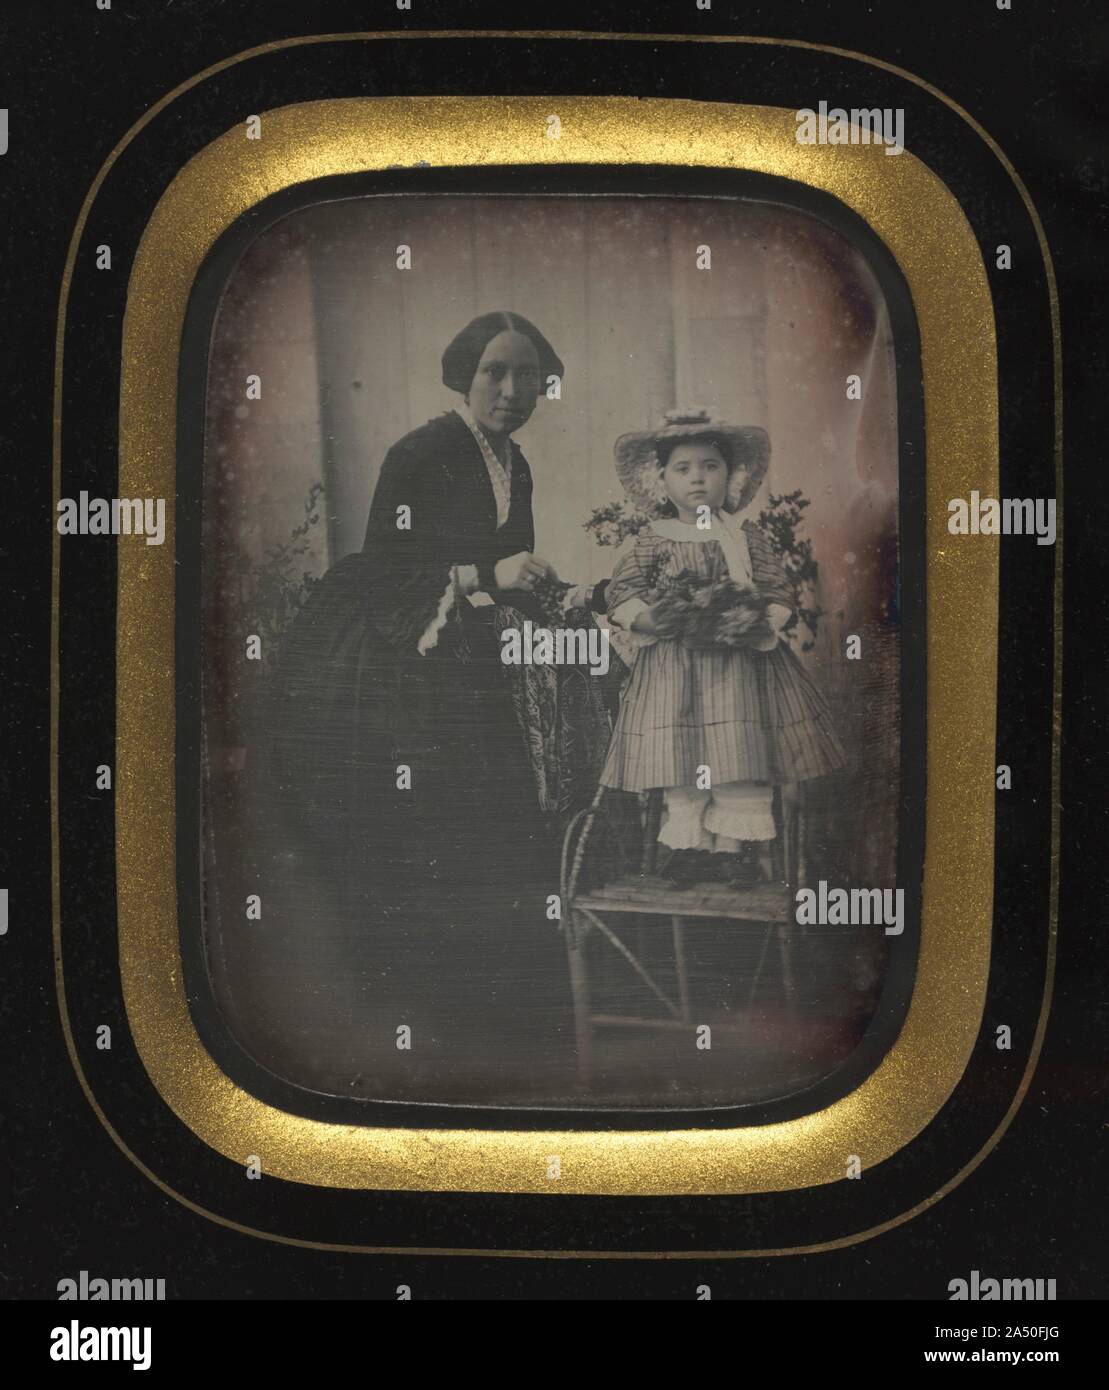 Child Standing on a Chair Holding Flowers, with Mother, c. 1855. Until the mid-1850s the daguerreotype process was the method preferred by the commercial photographers willing to meet the ever-growing demand for likenesses of family and friends. This daguerreotype captures the patience of a mother and child, who were required to hold their poses for some time during the exposure of the silver-coated copper plate. Only the bouquet of flowers held by the child is slightly blurred. Characteristic of the technique, the details in the image-fabric, facial features, and accessories-are clearly defin Stock Photo